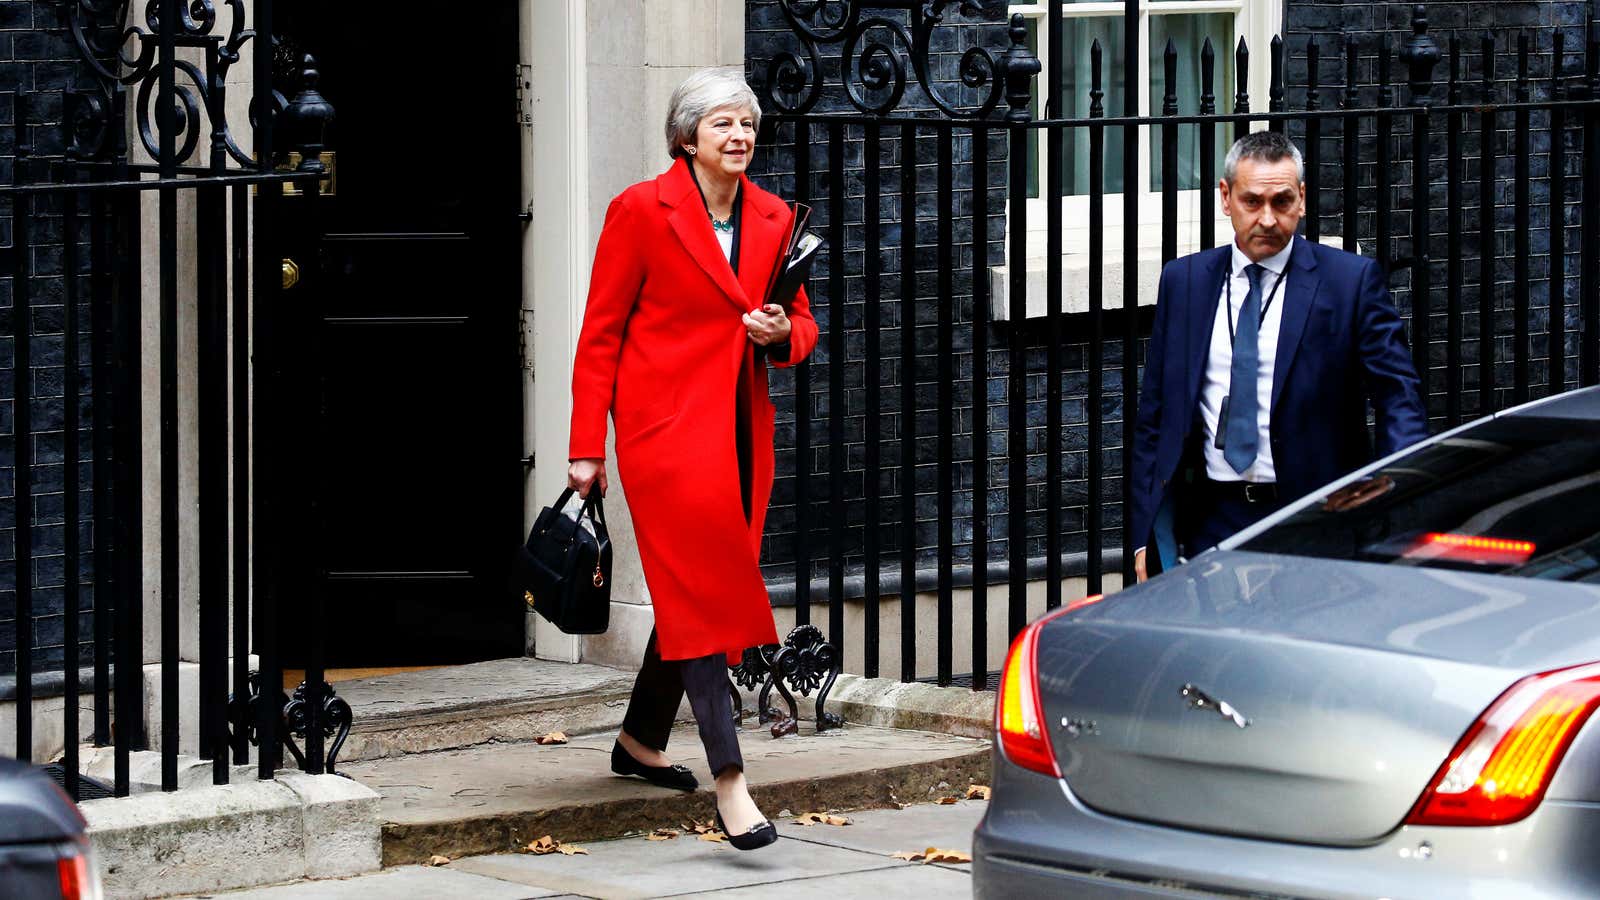 On her way to the House of Commons.